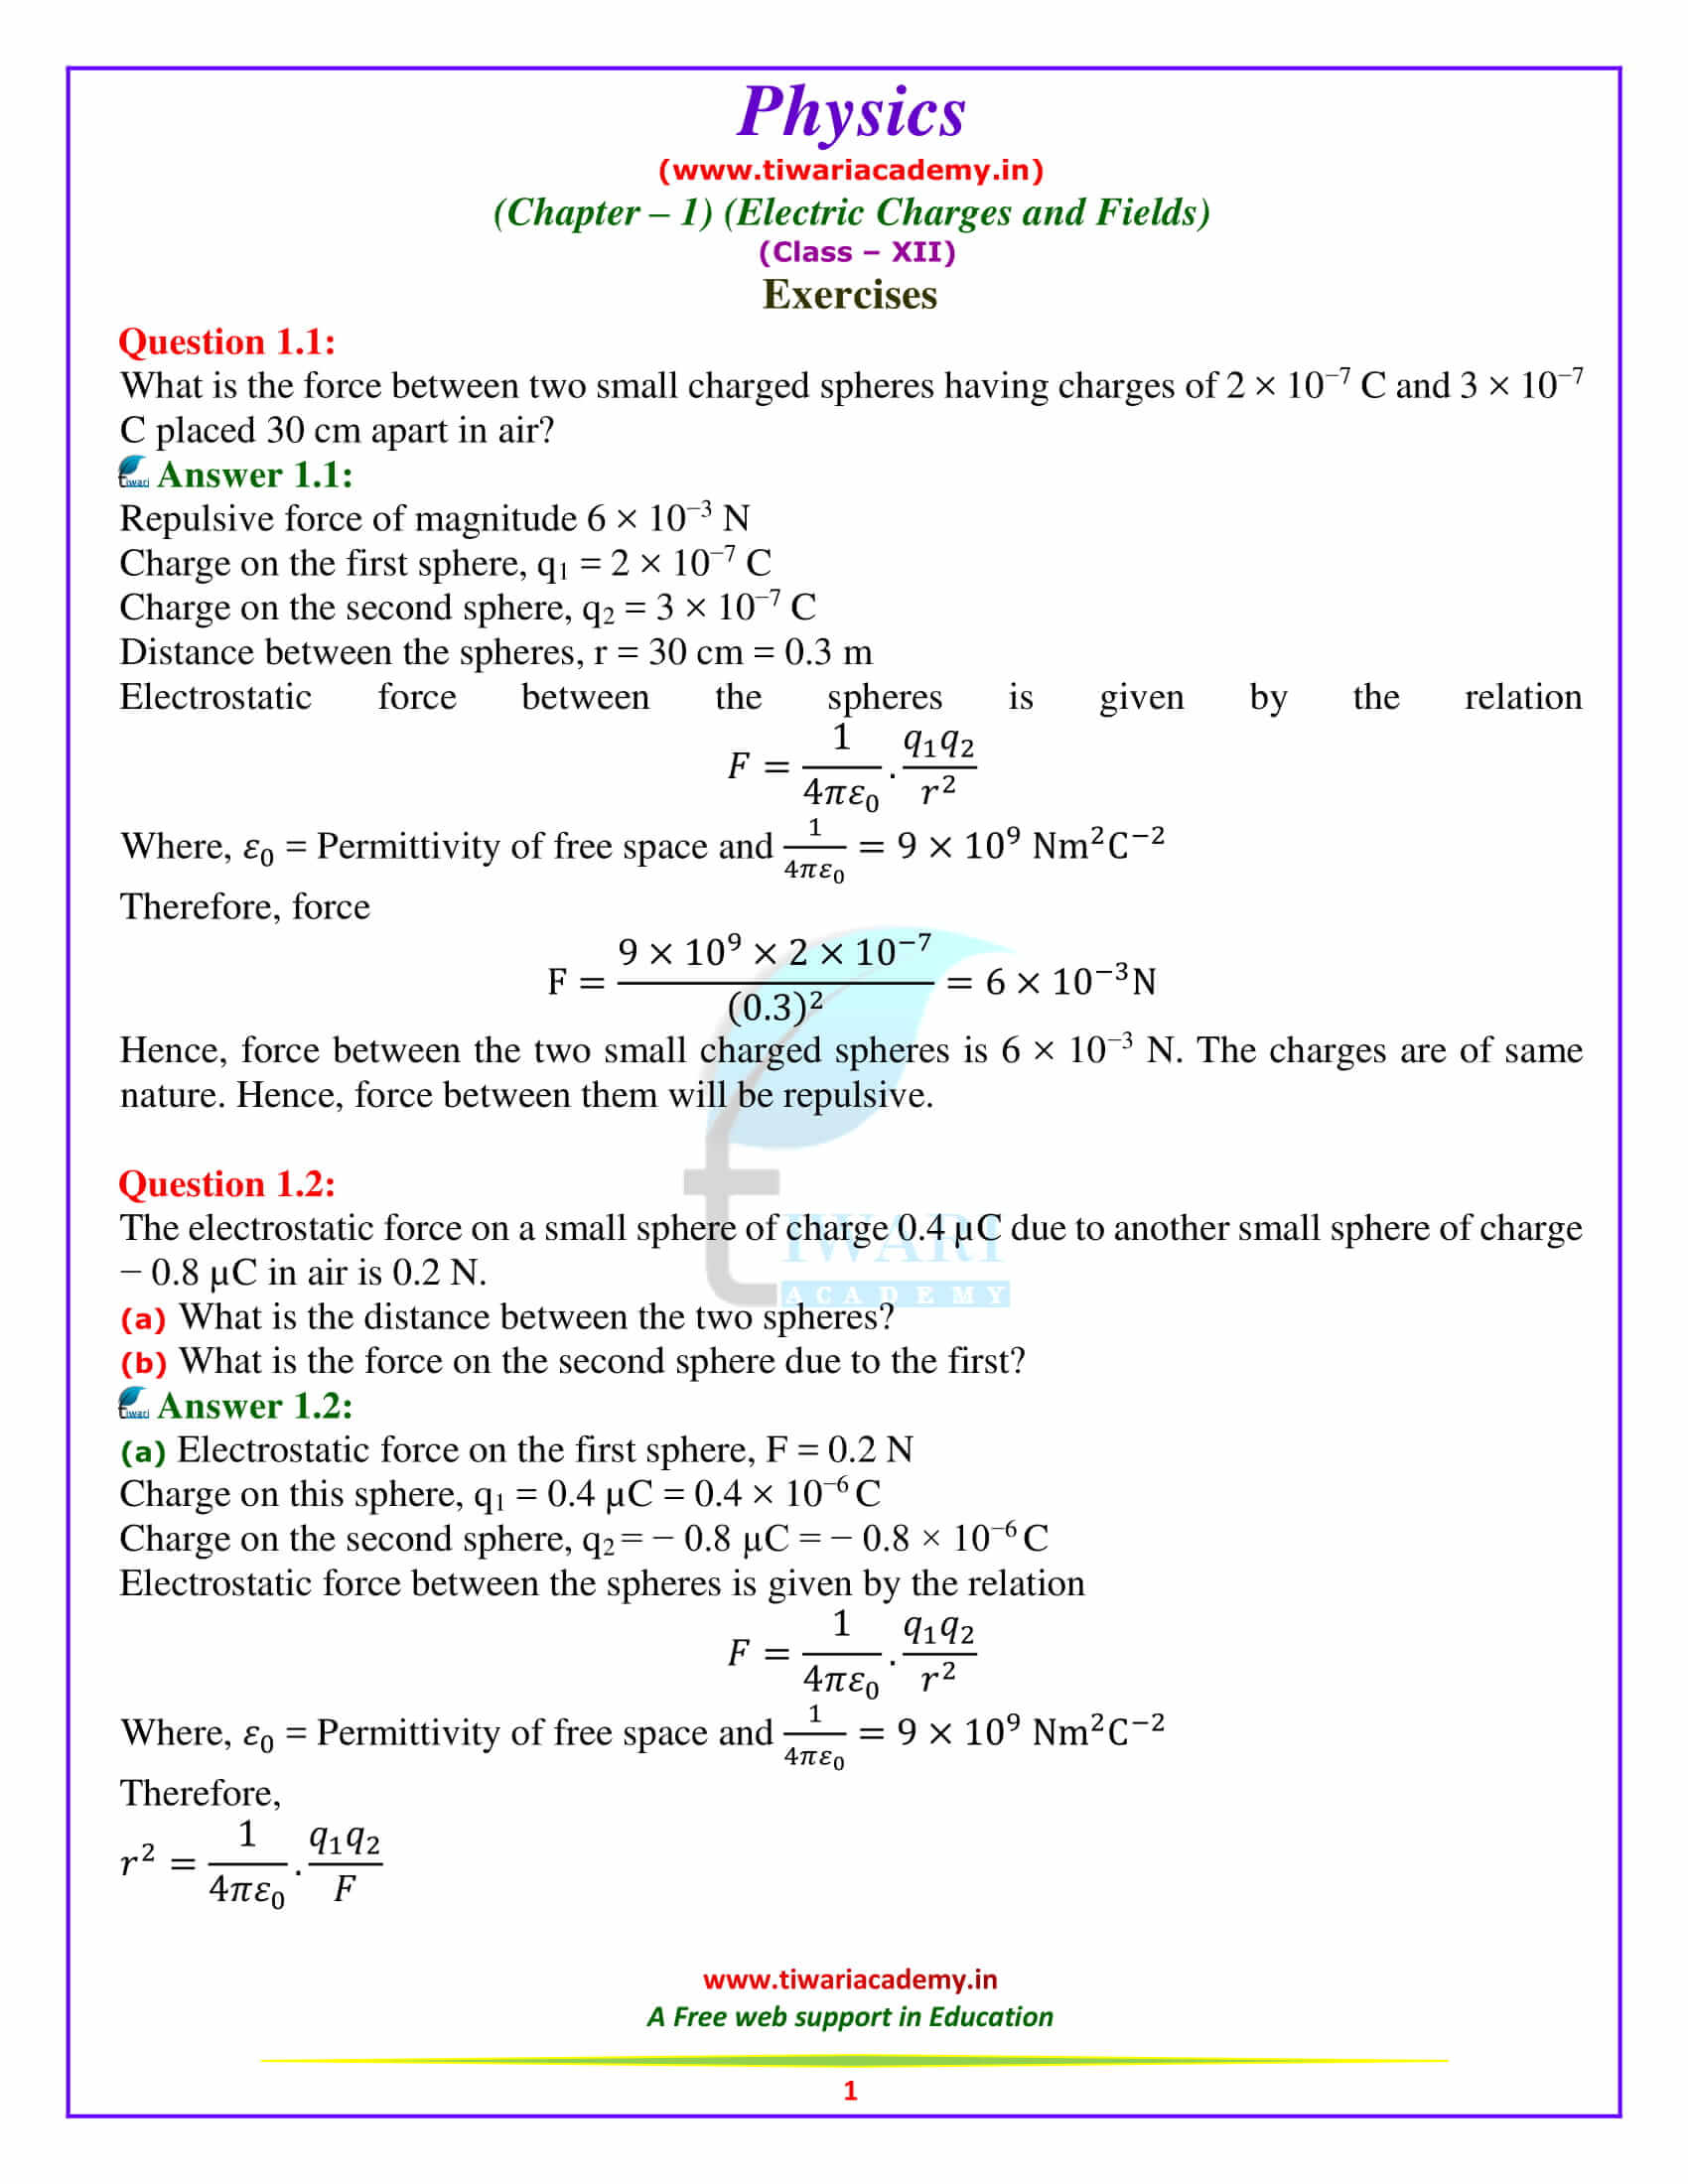 12 Physics NCERT Solutions Chapter 1 Exercises 01 1 